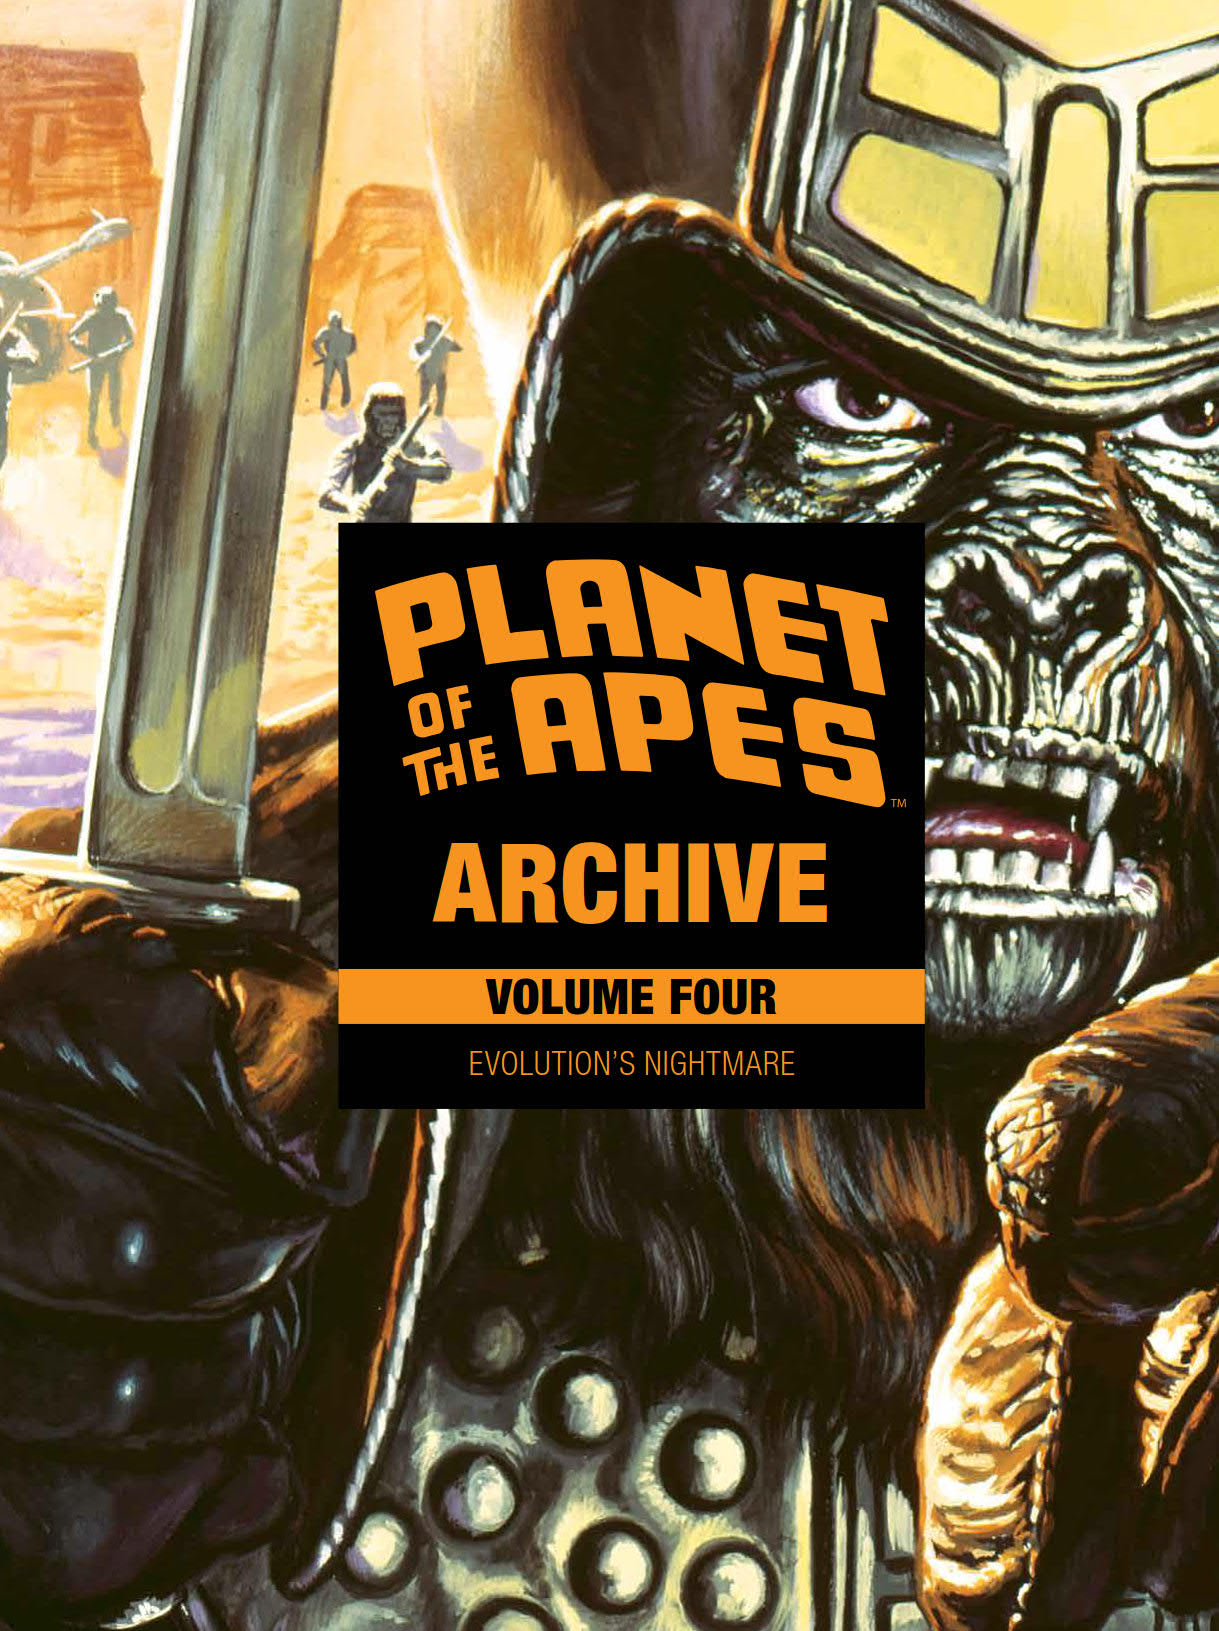 PLANET OF APES ARCHIVE HC VOL 04